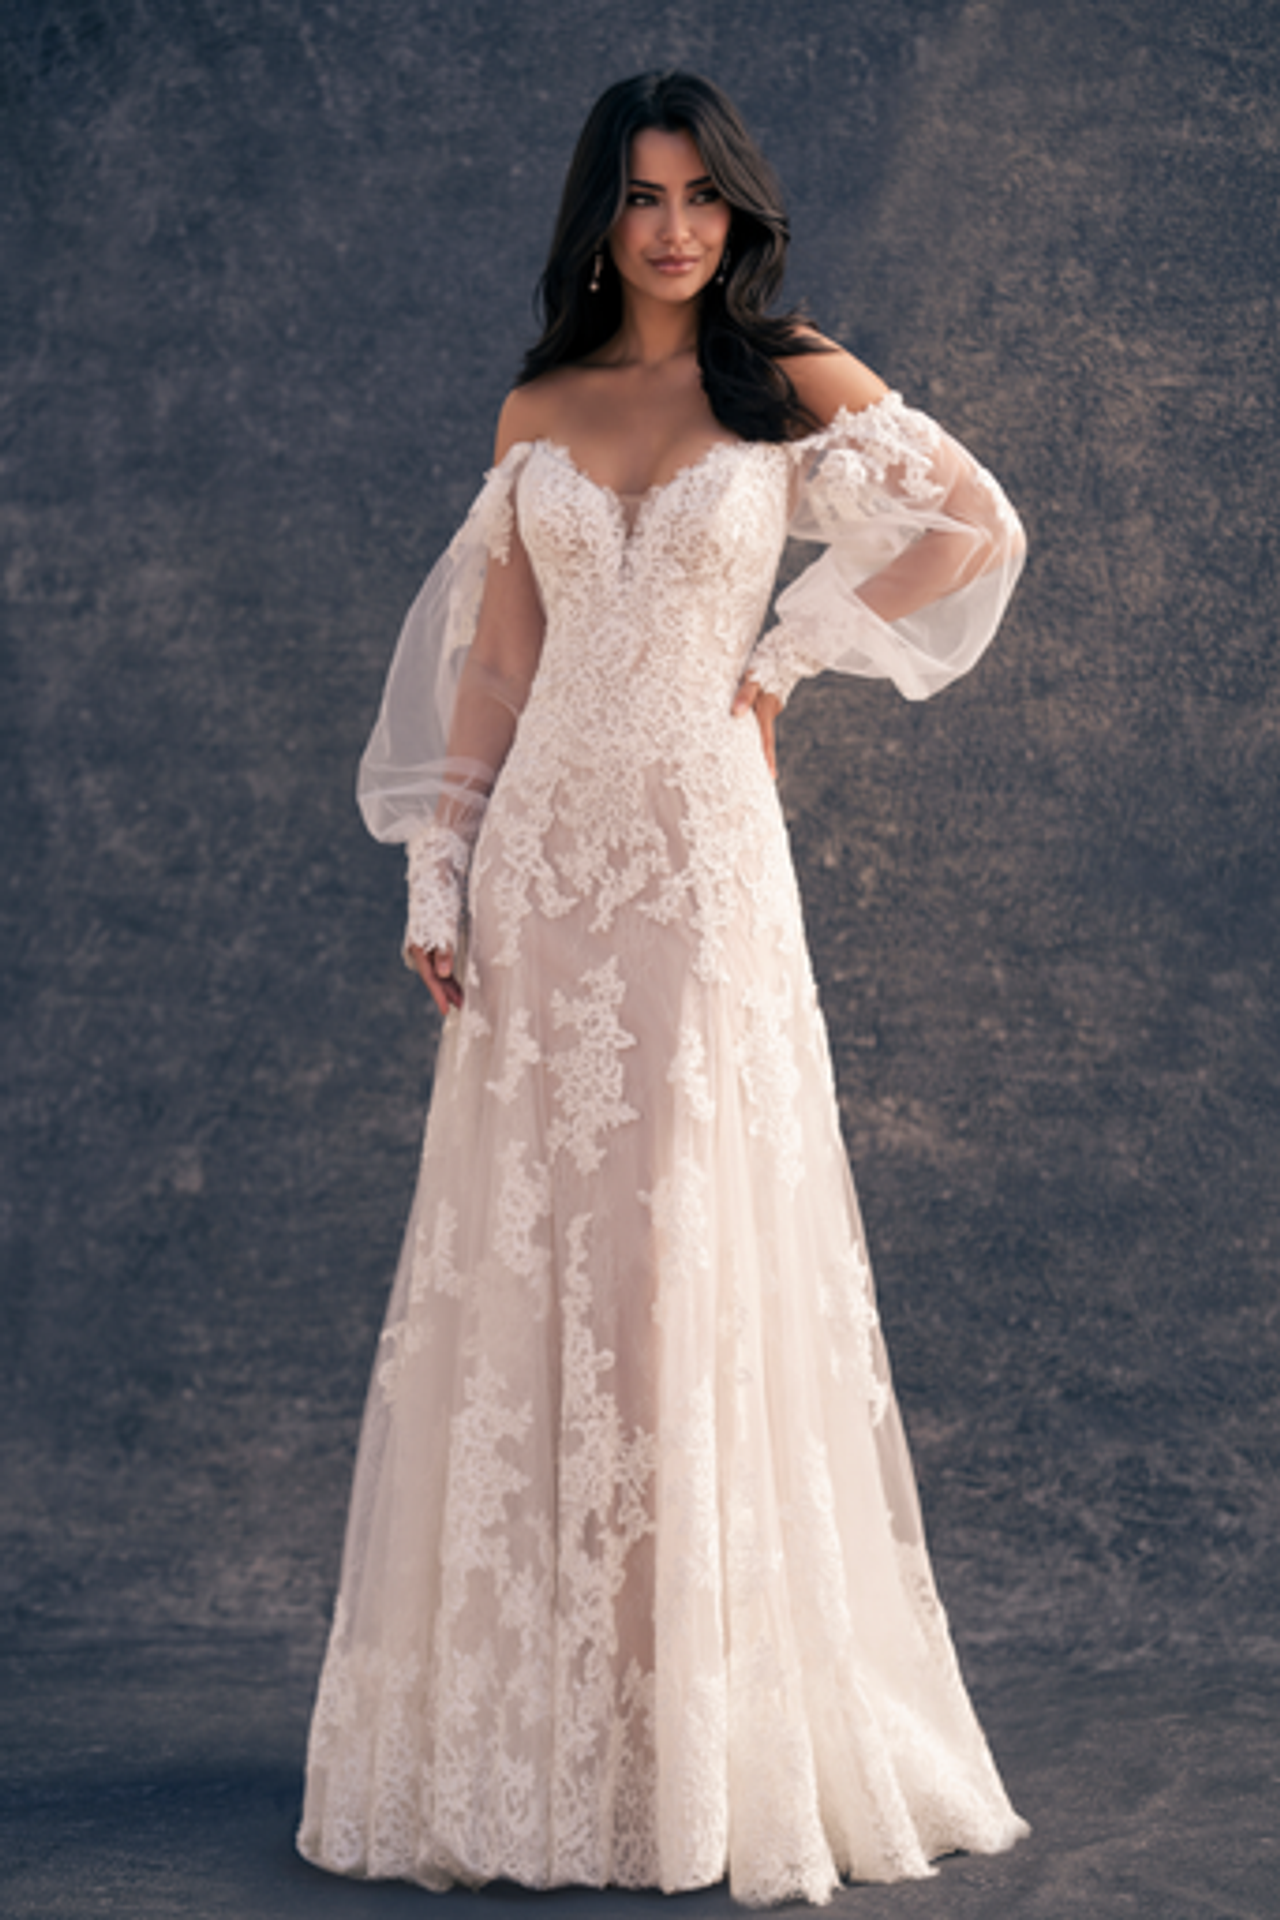 Bohemian Romantic Sweetheart Gown With Detachable Skirt by Allure Bridals - Image 1